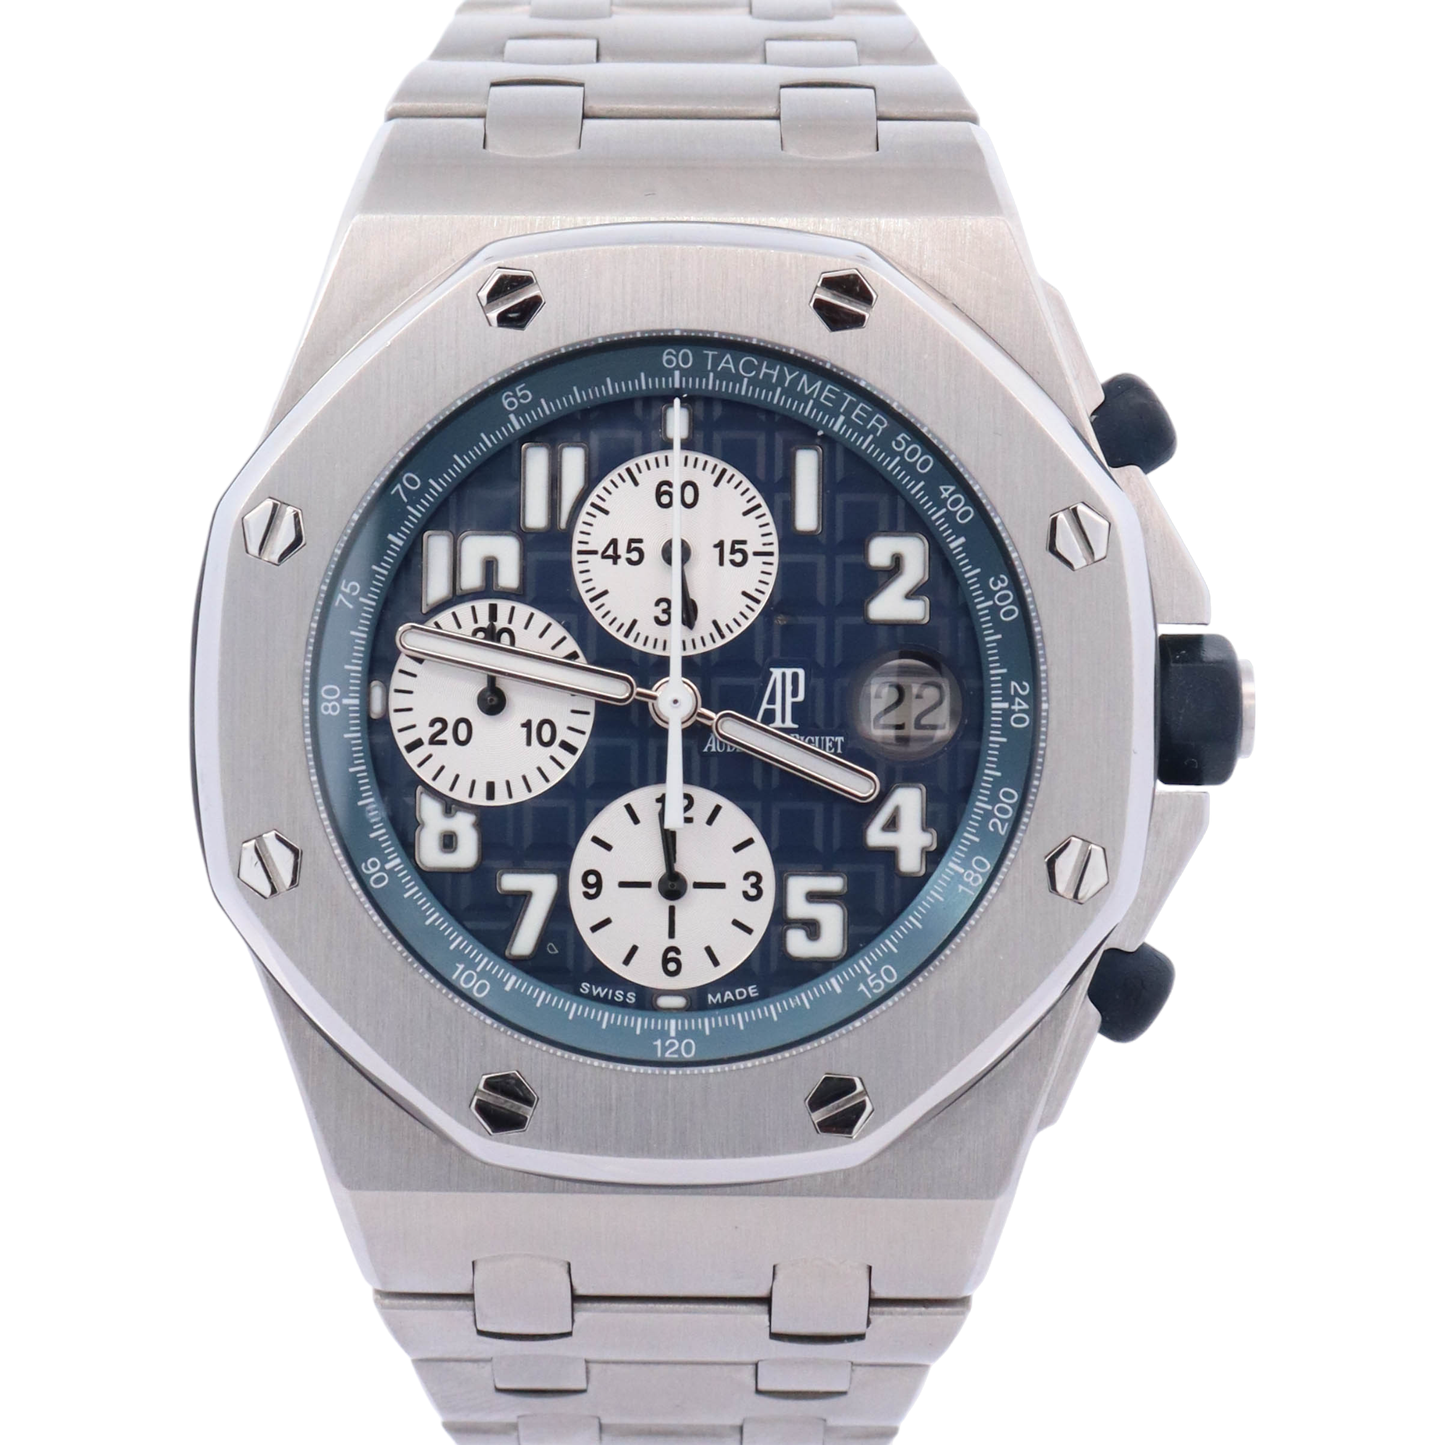 Audemars Piguet Royal Oak Offshore 42mm Stainless Steel Blue Chronograph Dial Watch Reference# 25721ST.OO.1000ST.09.A - Happy Jewelers Fine Jewelry Lifetime Warranty